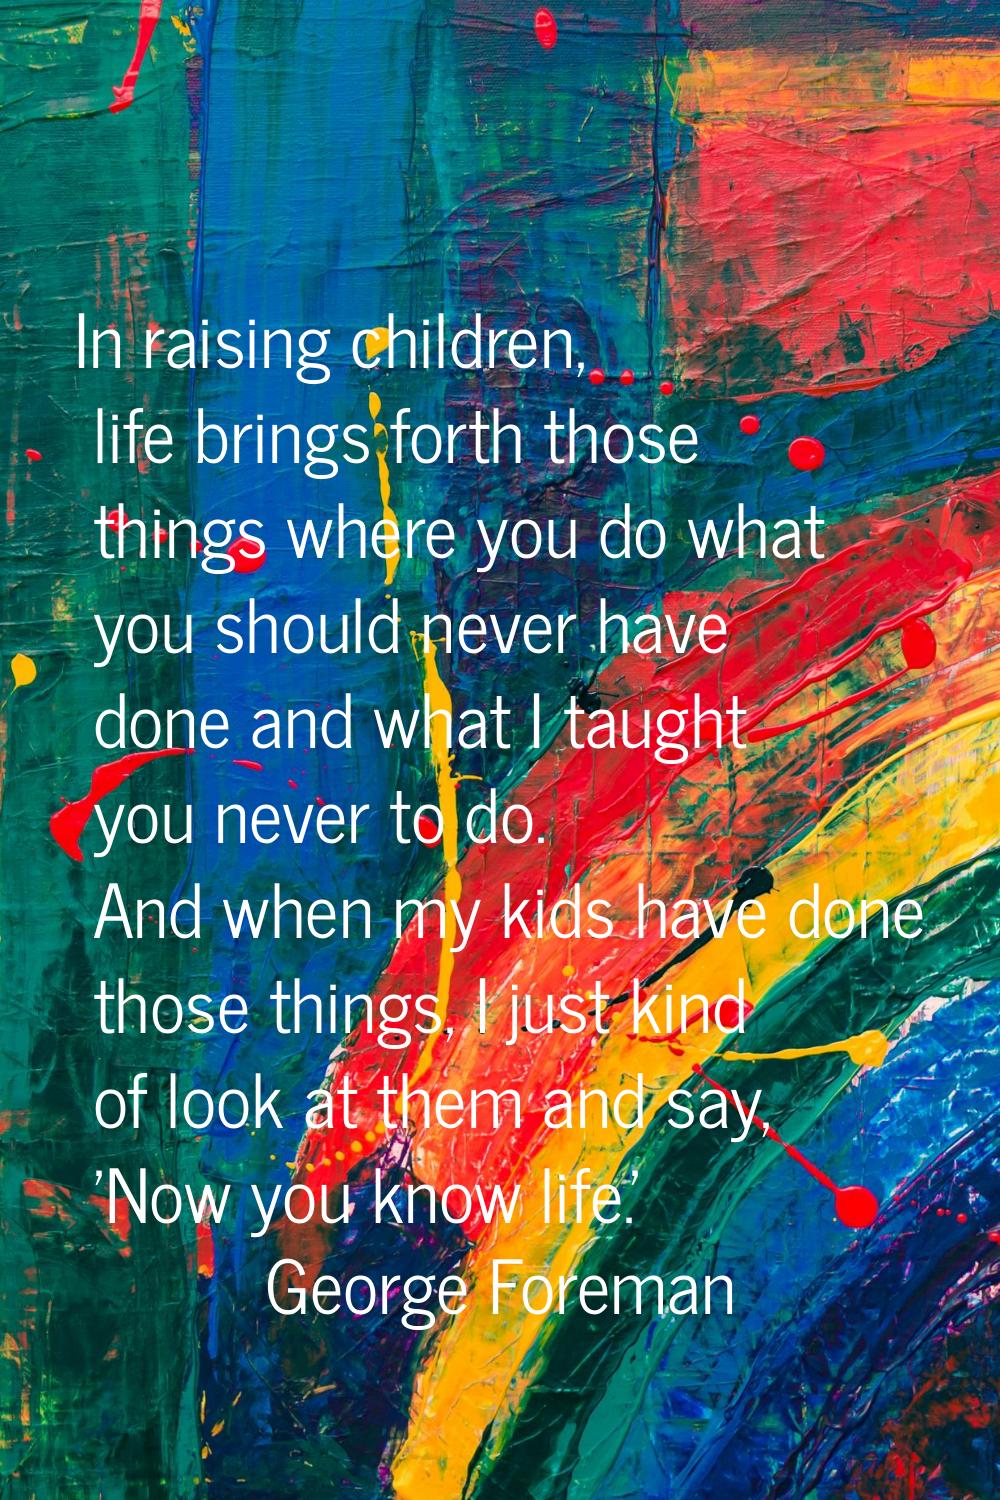 In raising children, life brings forth those things where you do what you should never have done an